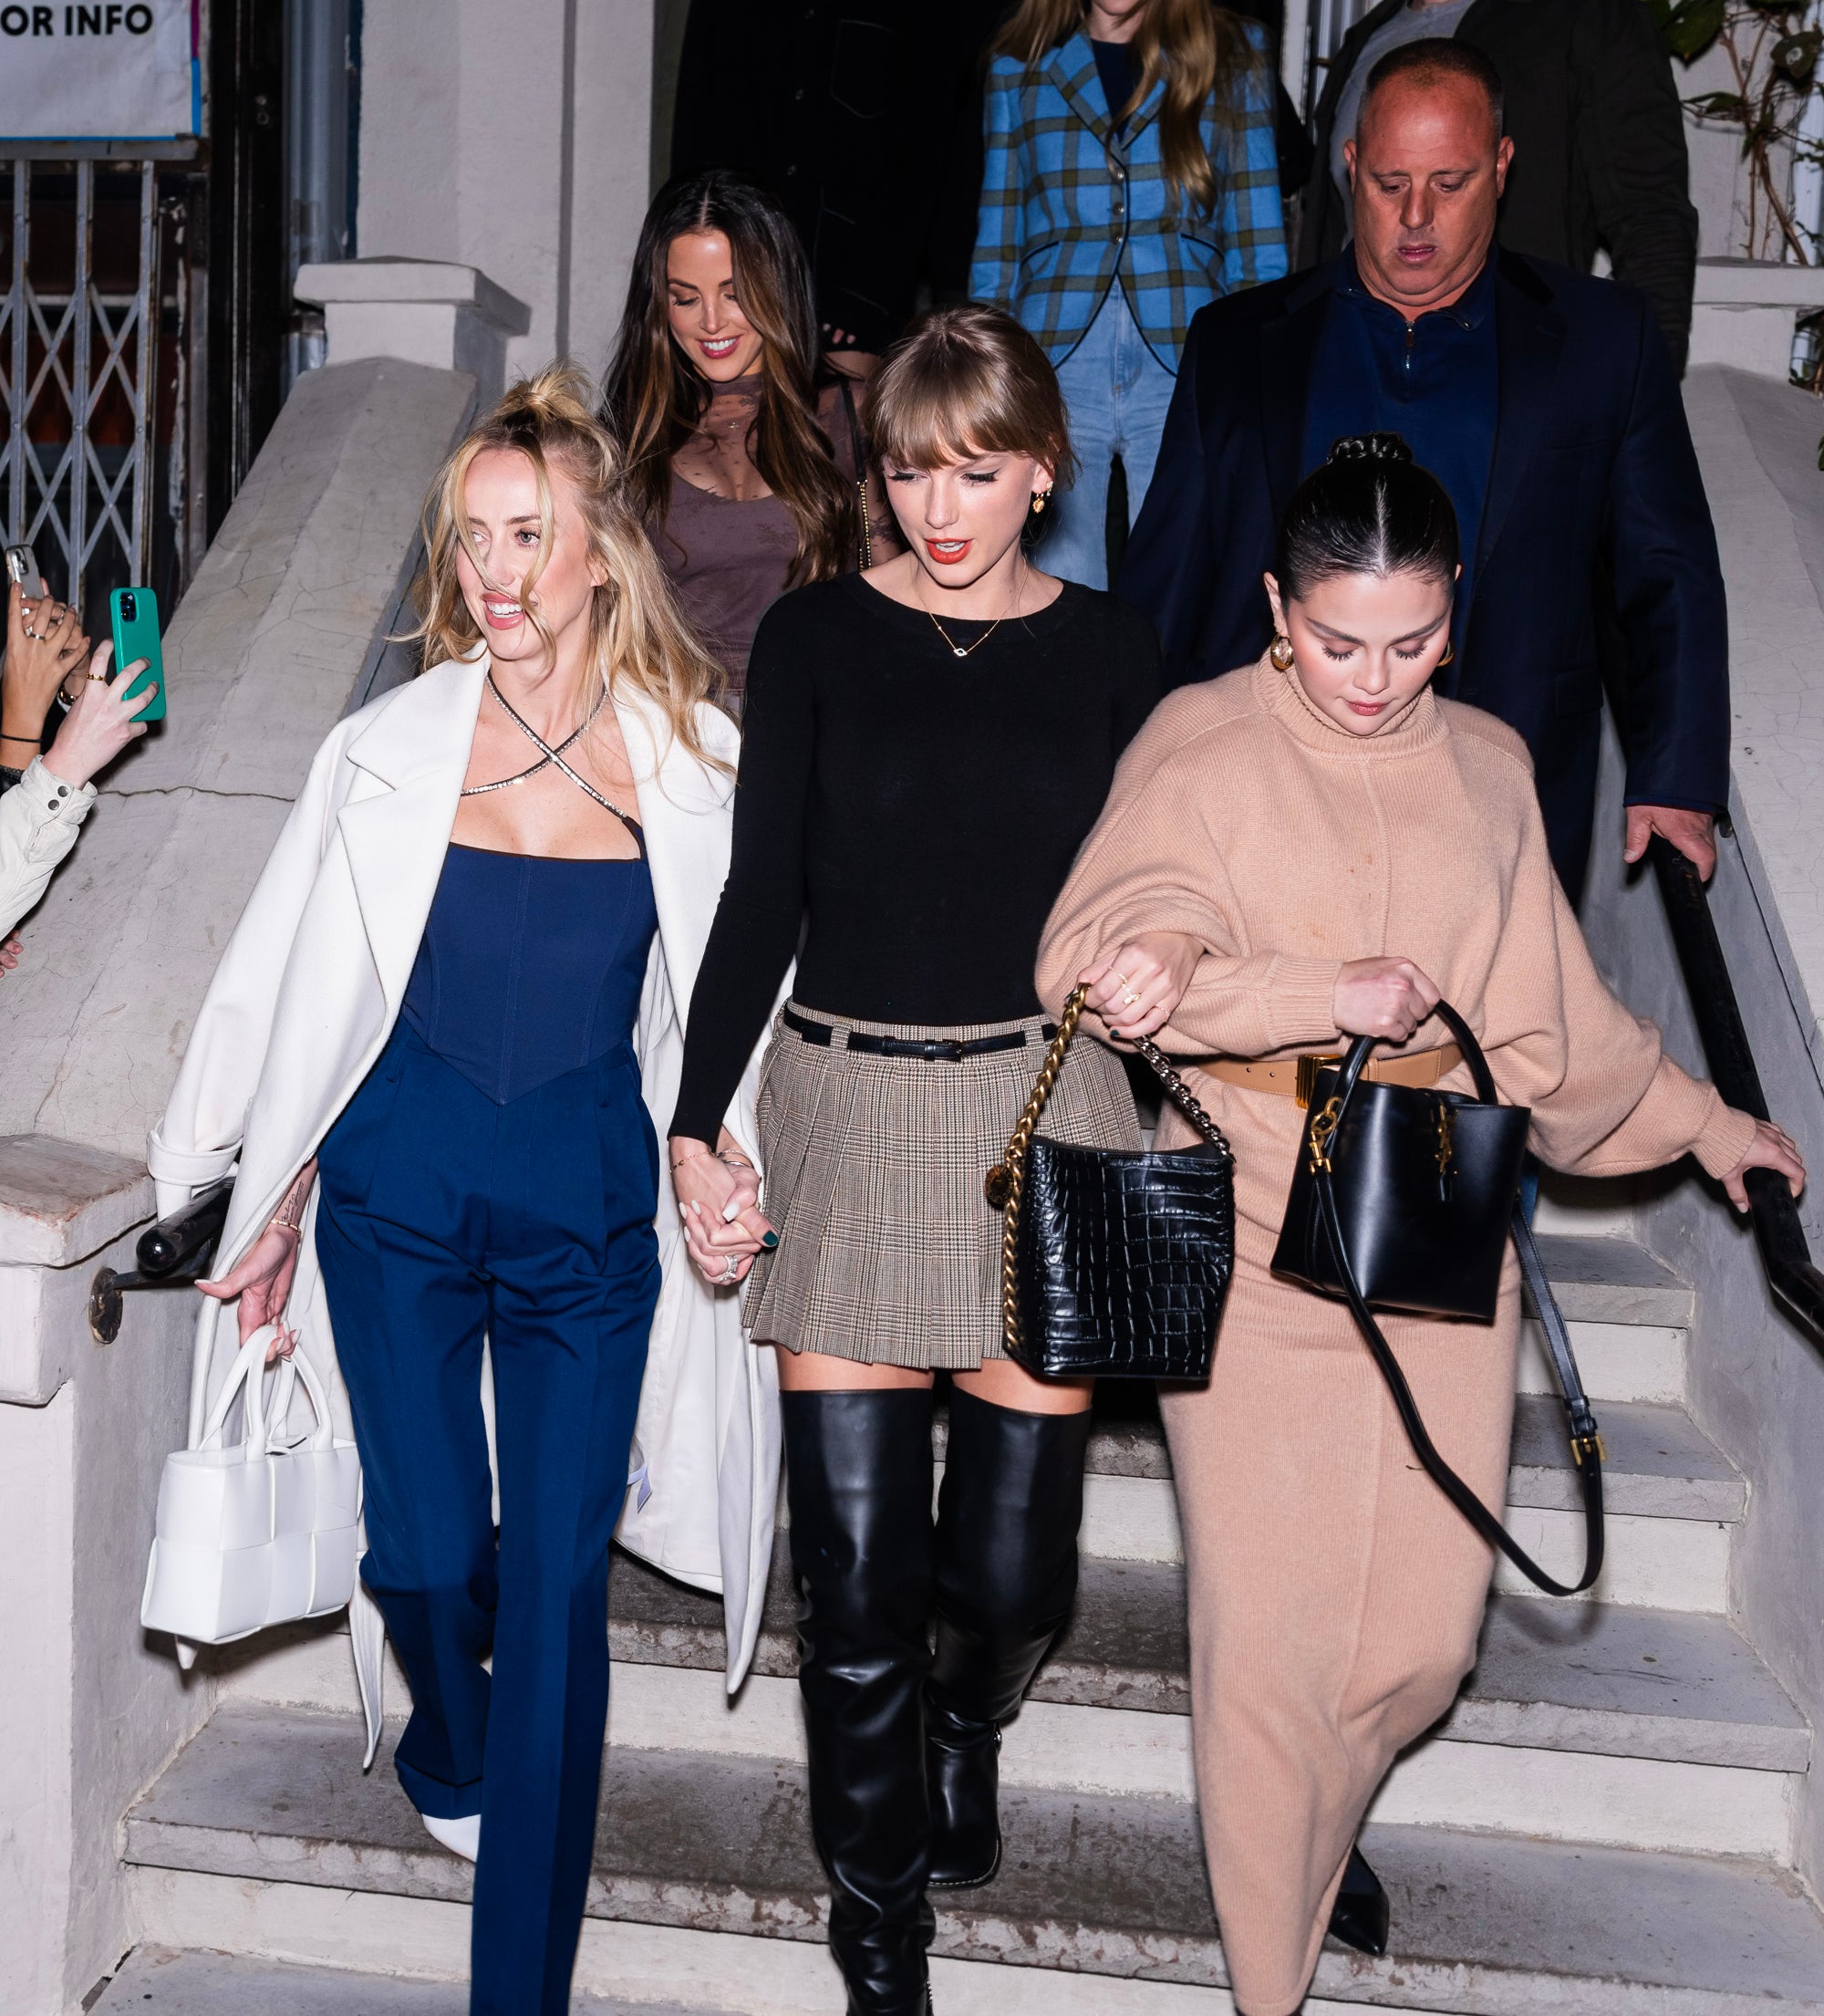 Taylor and friends exiting a building